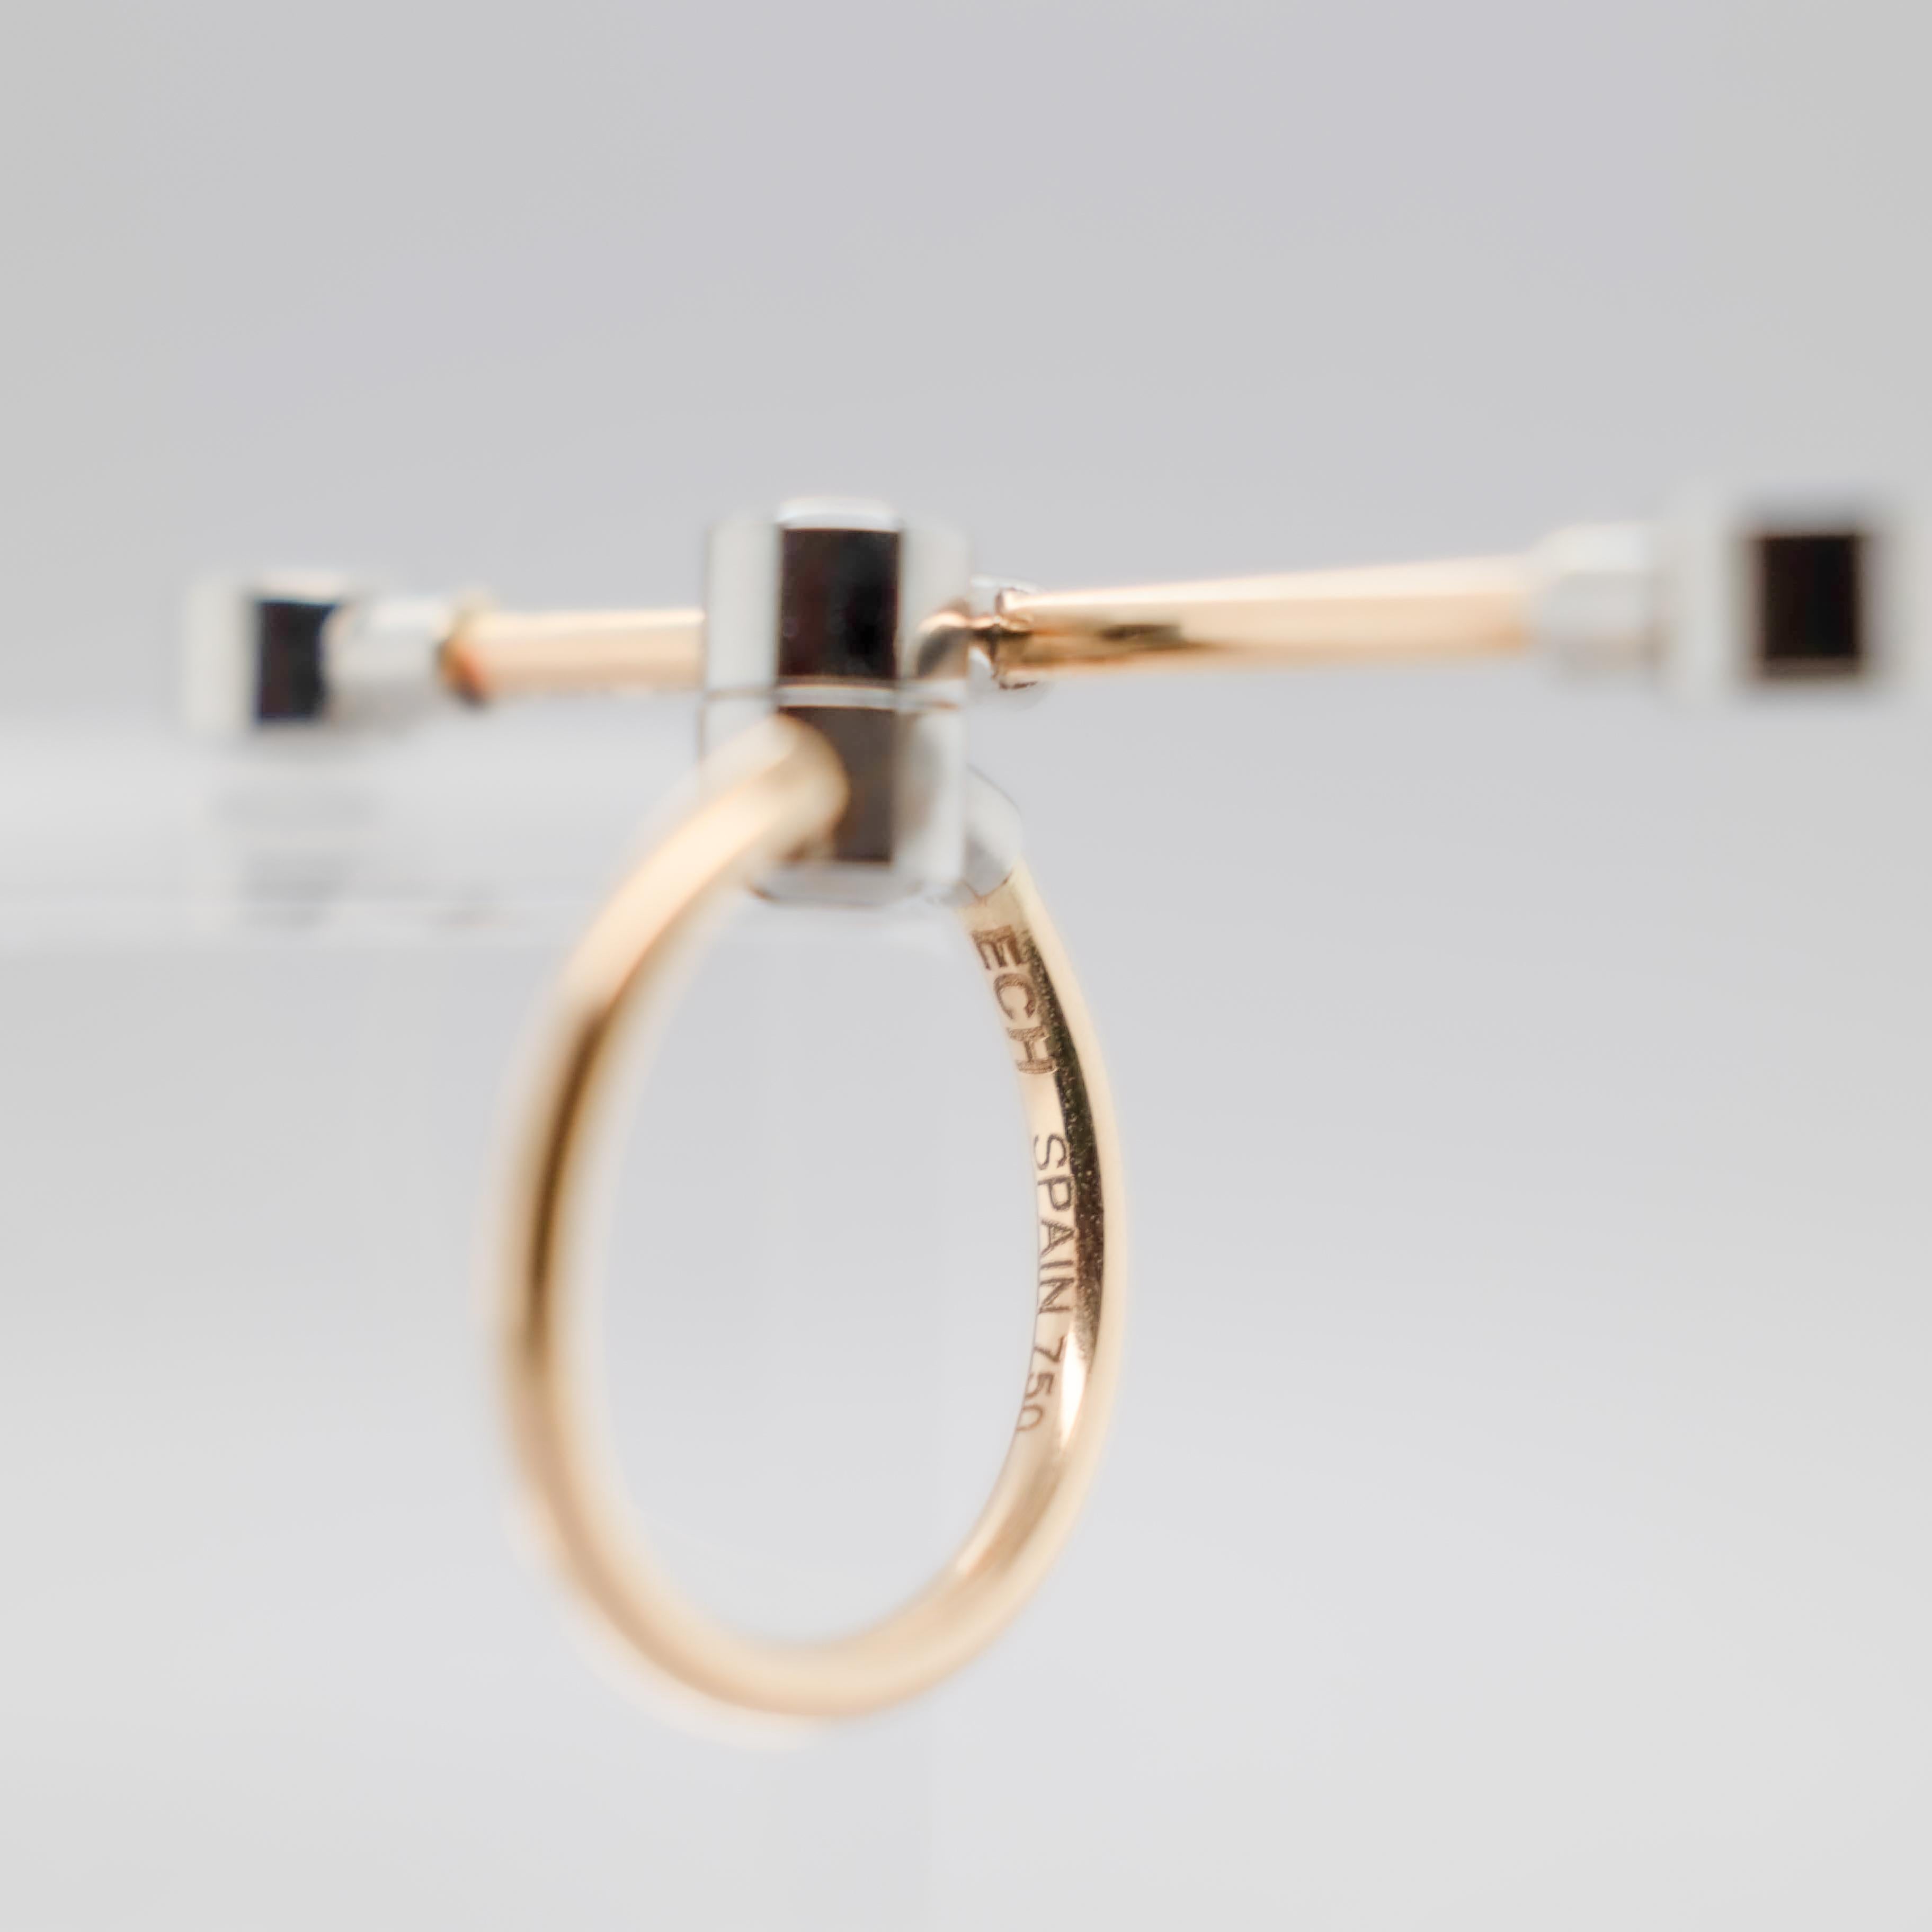 Contemporary ring, Yellow gold 18K.

You can add or remove the modular stick.
This is only possible with a surgical steel mechanism. Surgical steel is more resistant to mechanical damage than gold and allows a perfect fit of the decorative elements